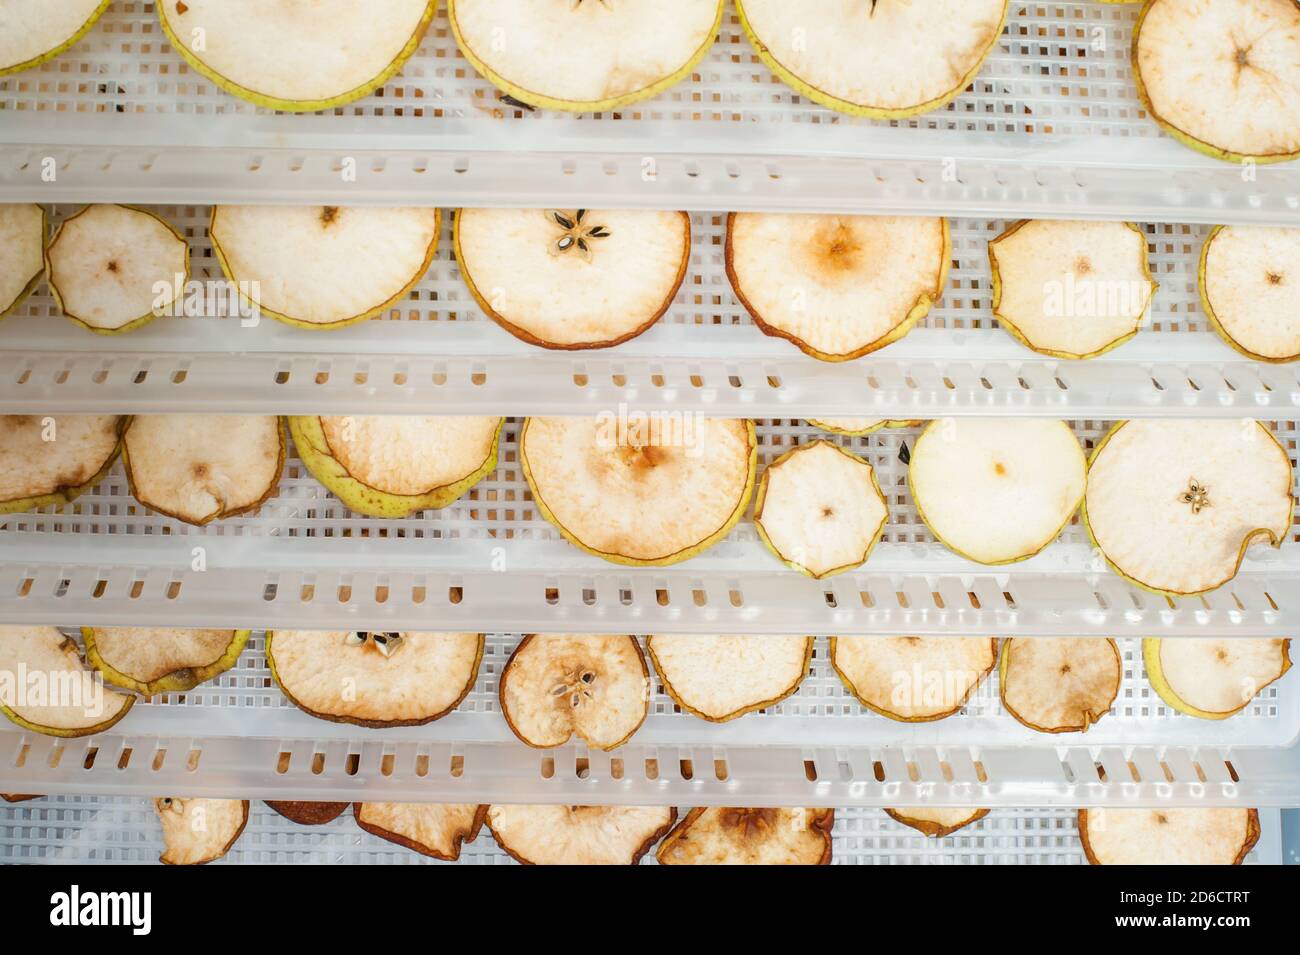 Detailed photo of home made dehydrated apples and pears Stock Photo